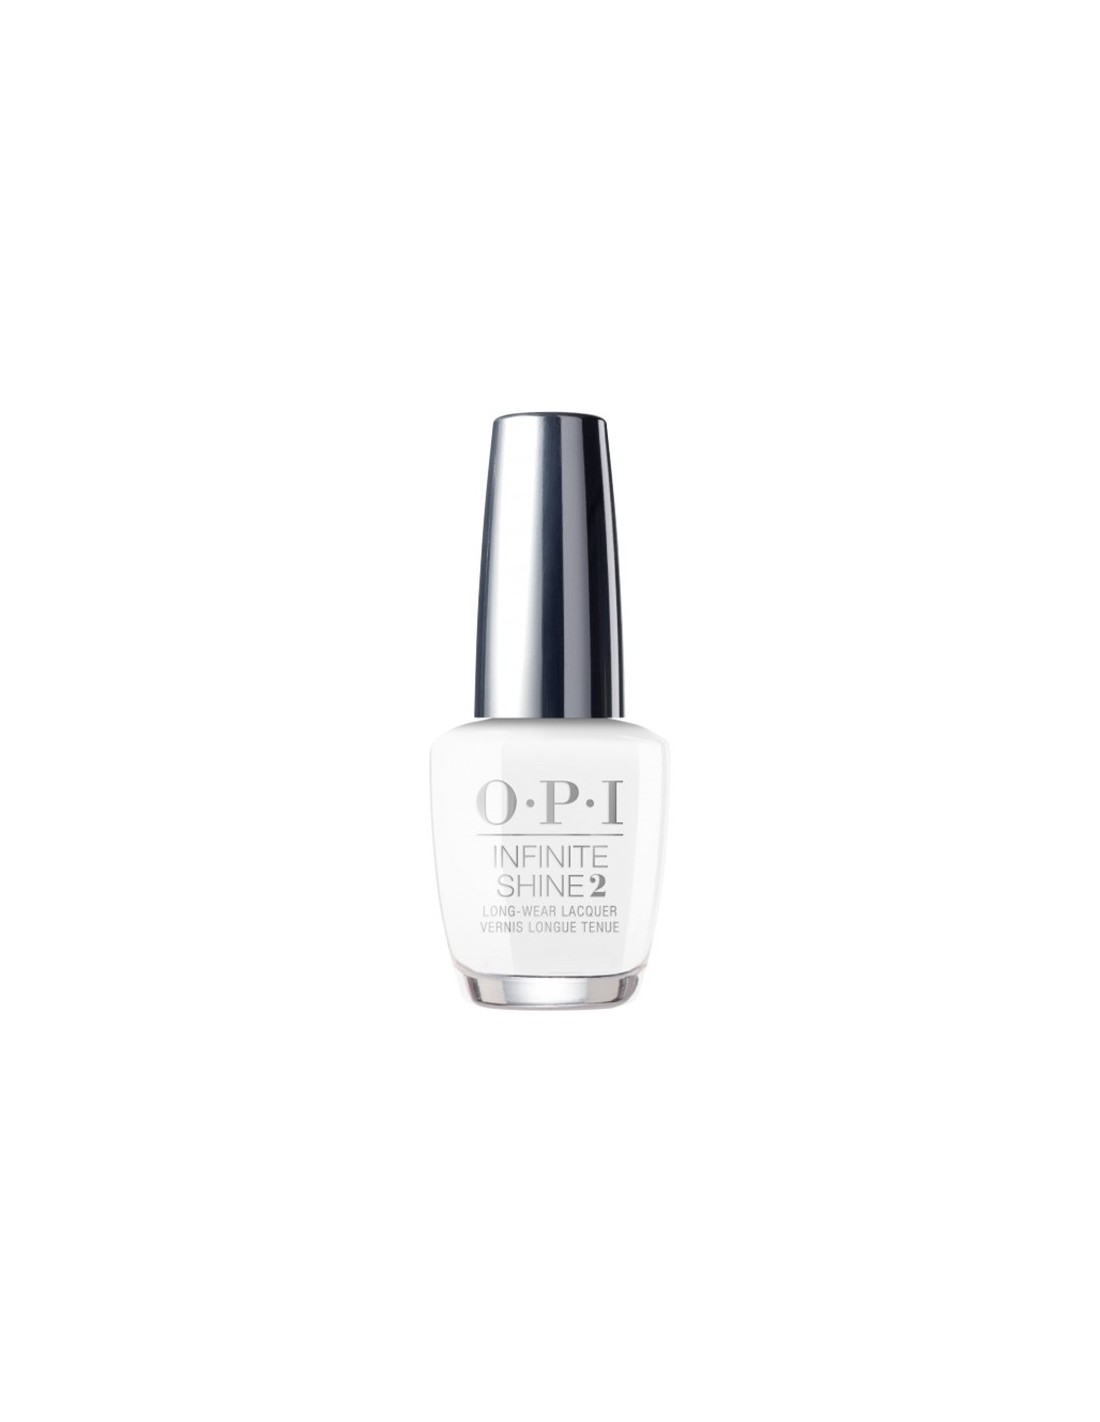 OPI - Some nail art trends come and go, but a classic #FrenchManicure is  always in style. Drop a 🤍 if you agree! Shop here: https://www.opi .com/shop-products/nail-polish-powders/nail-lacquer/alpine-snow By: @my10se  | Facebook